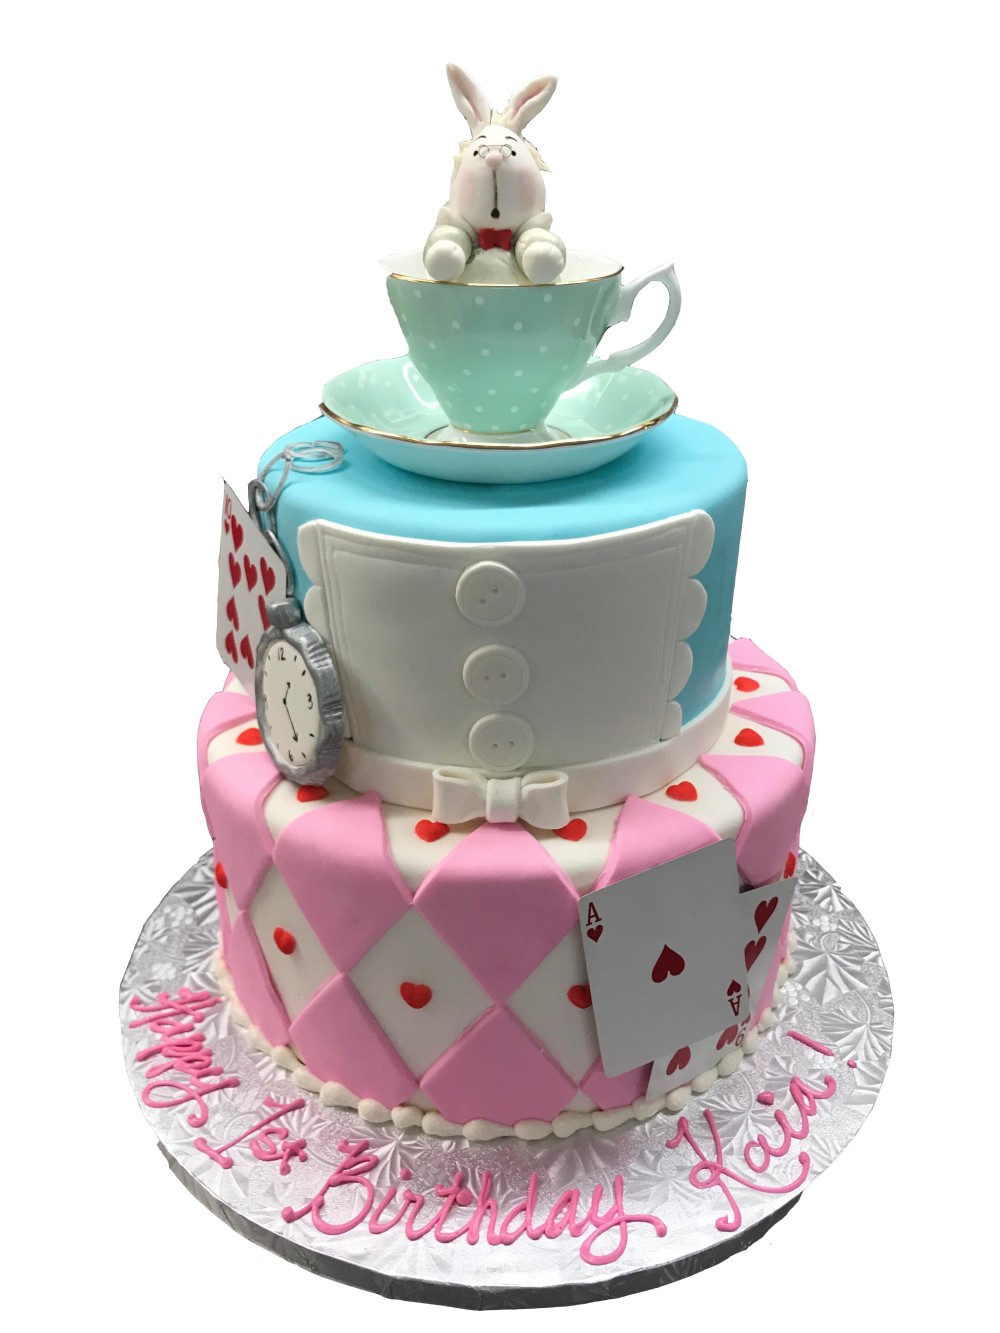 Alice in Wonderland cake decorated with fondant and fine china cup.